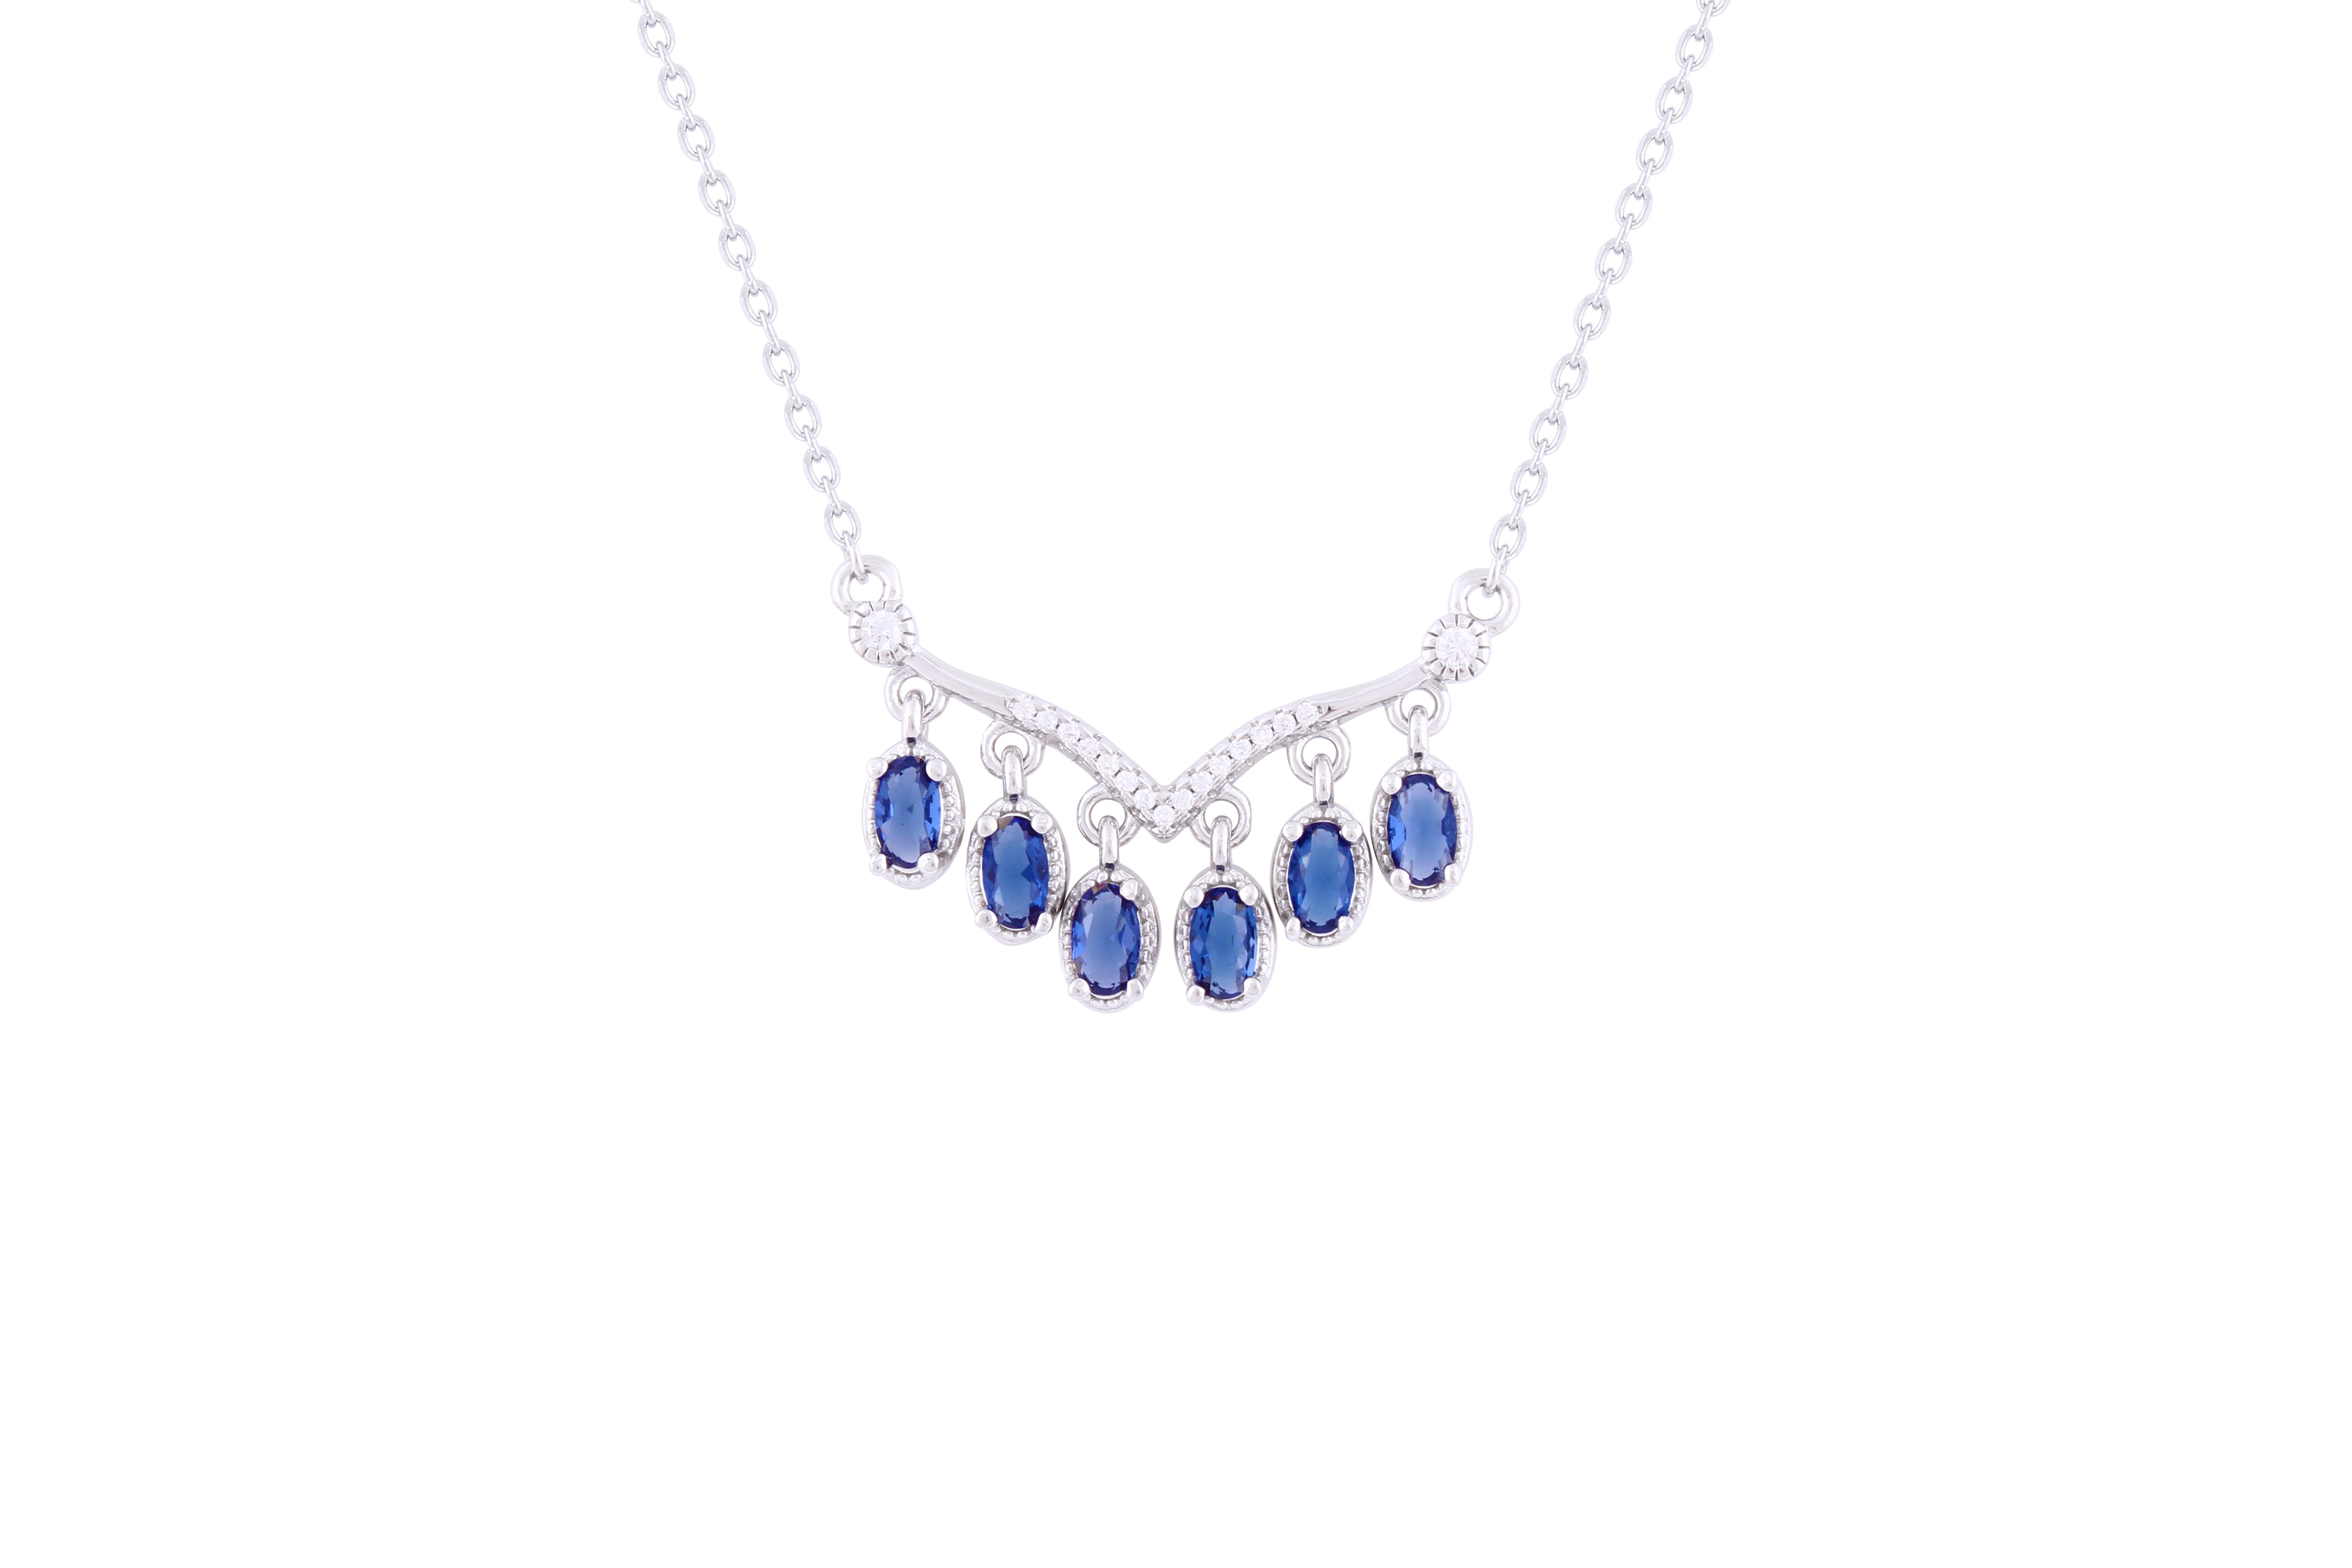 Asfour 925 Sterling Silver Necklace With Blue Oval Cut Stones NR0495-B